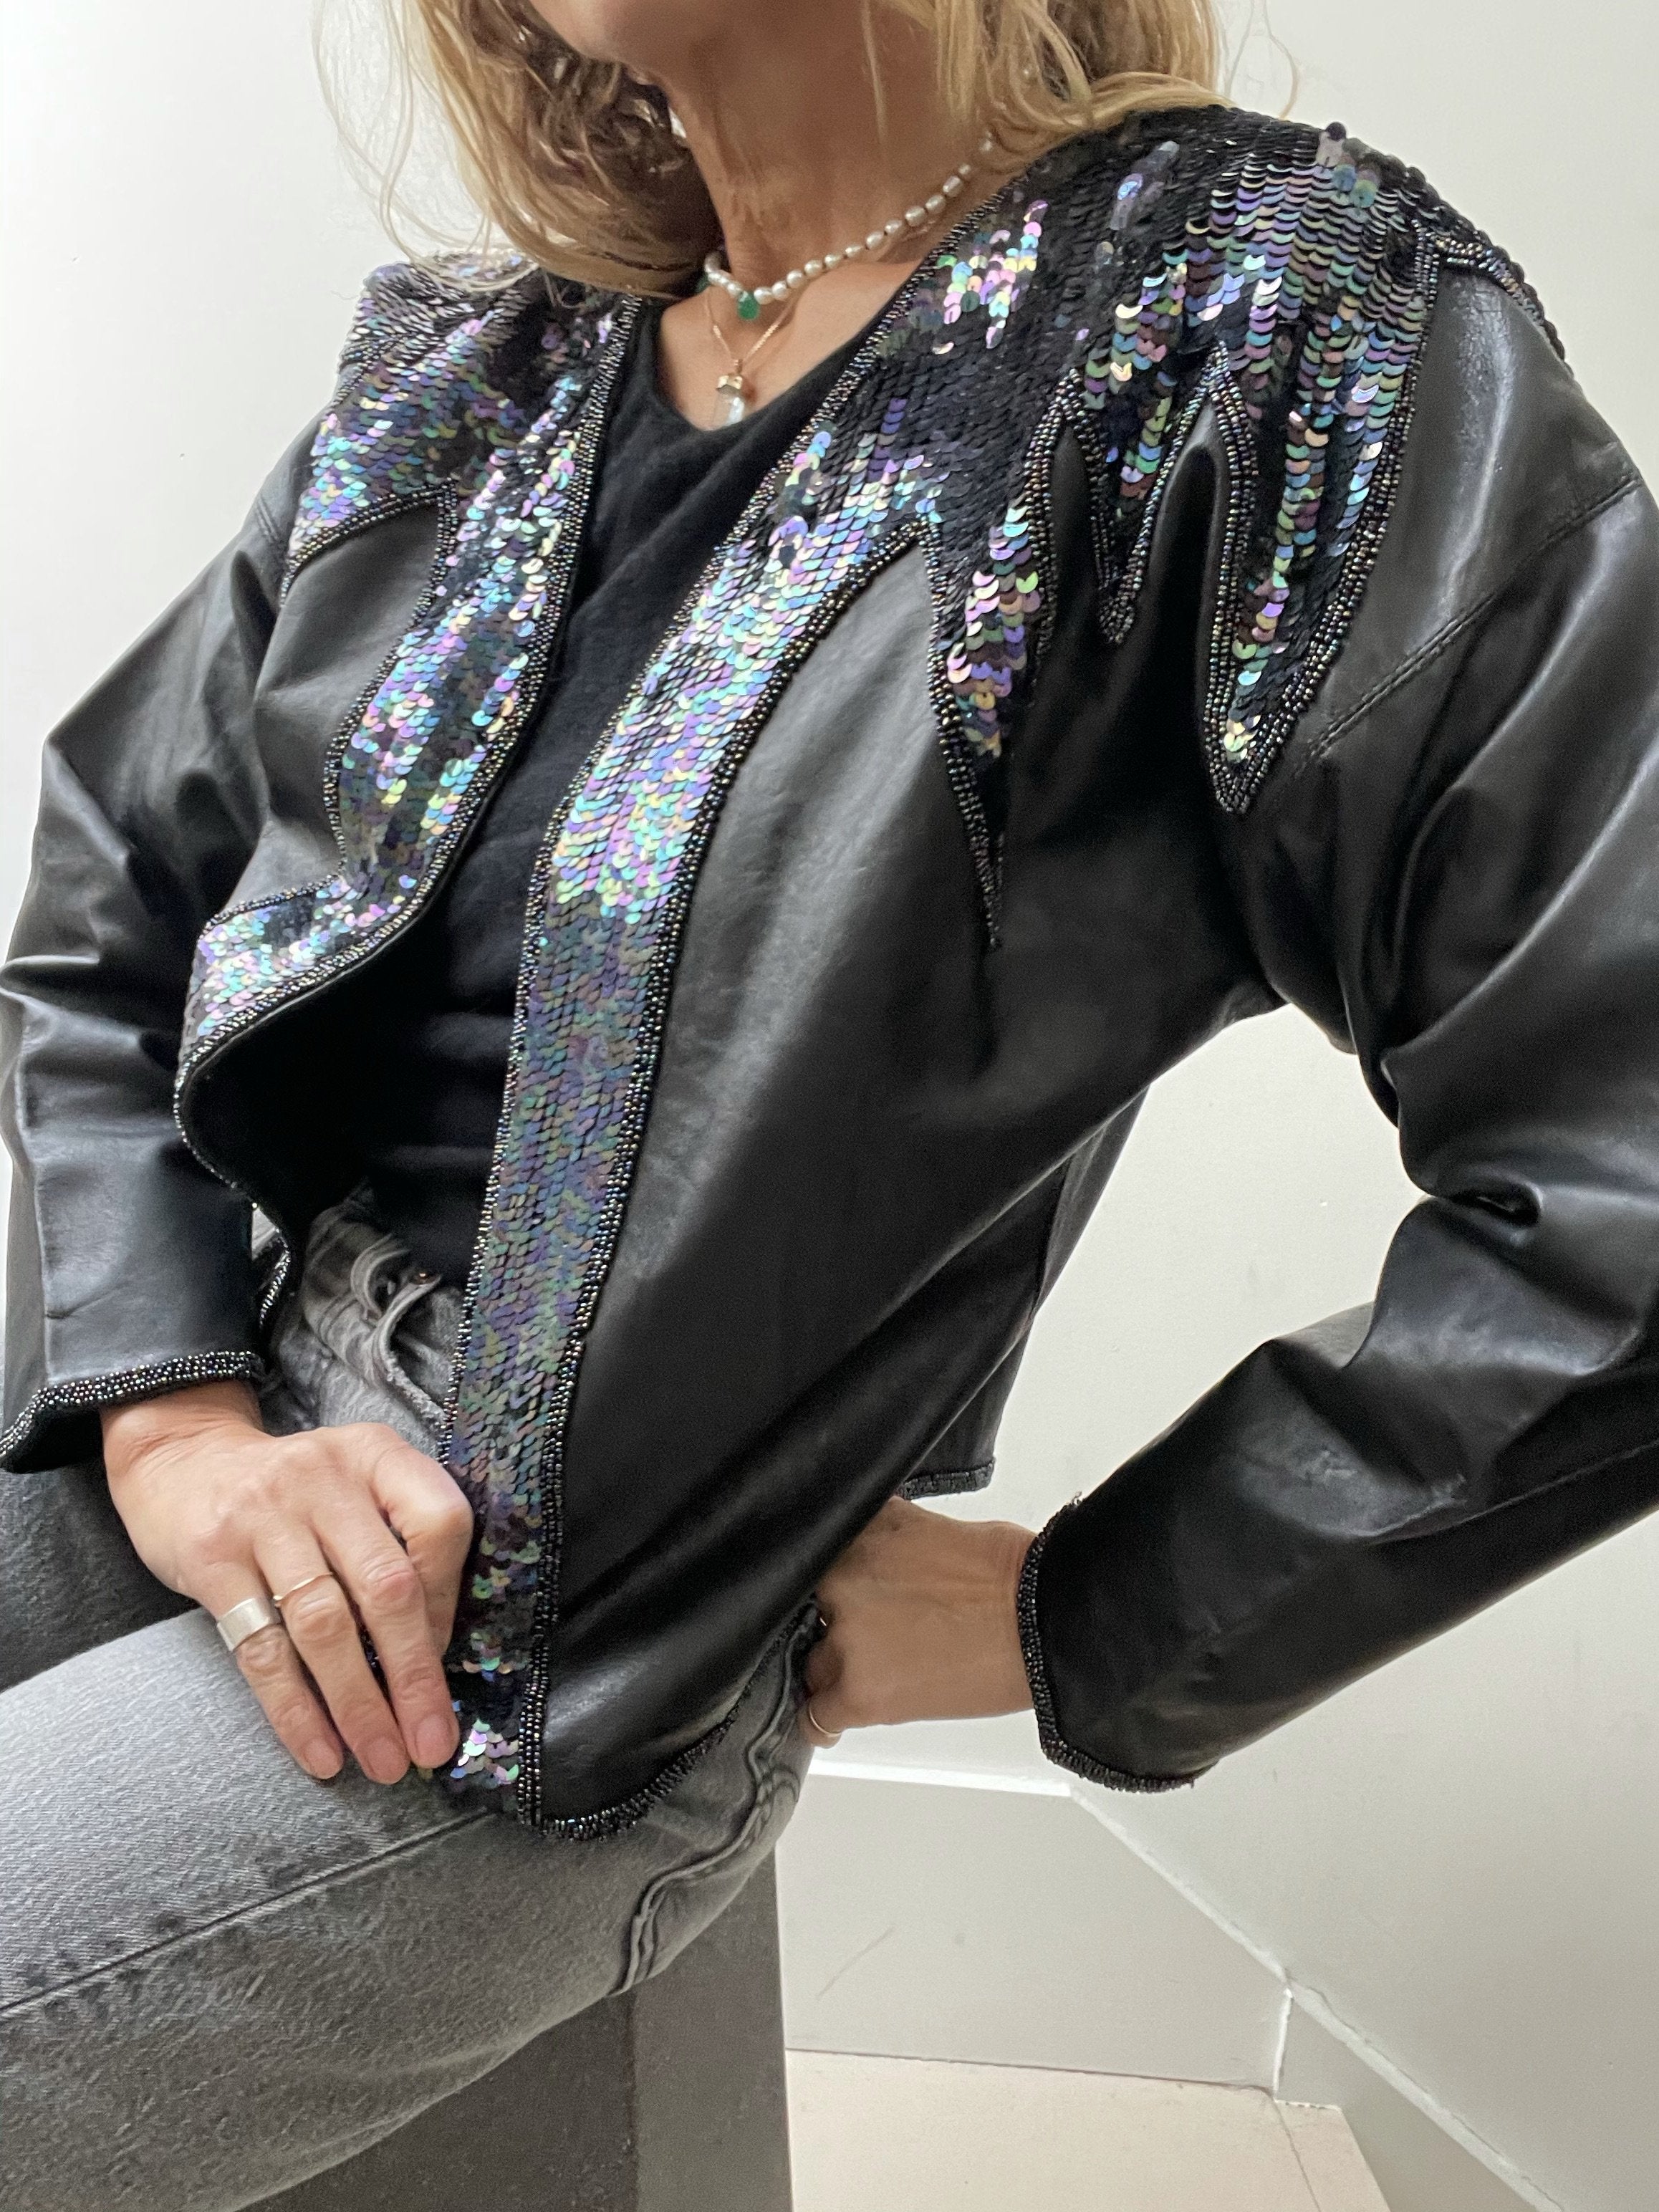 Not specified Jackets Medium Rare Leather Sequin Jacket